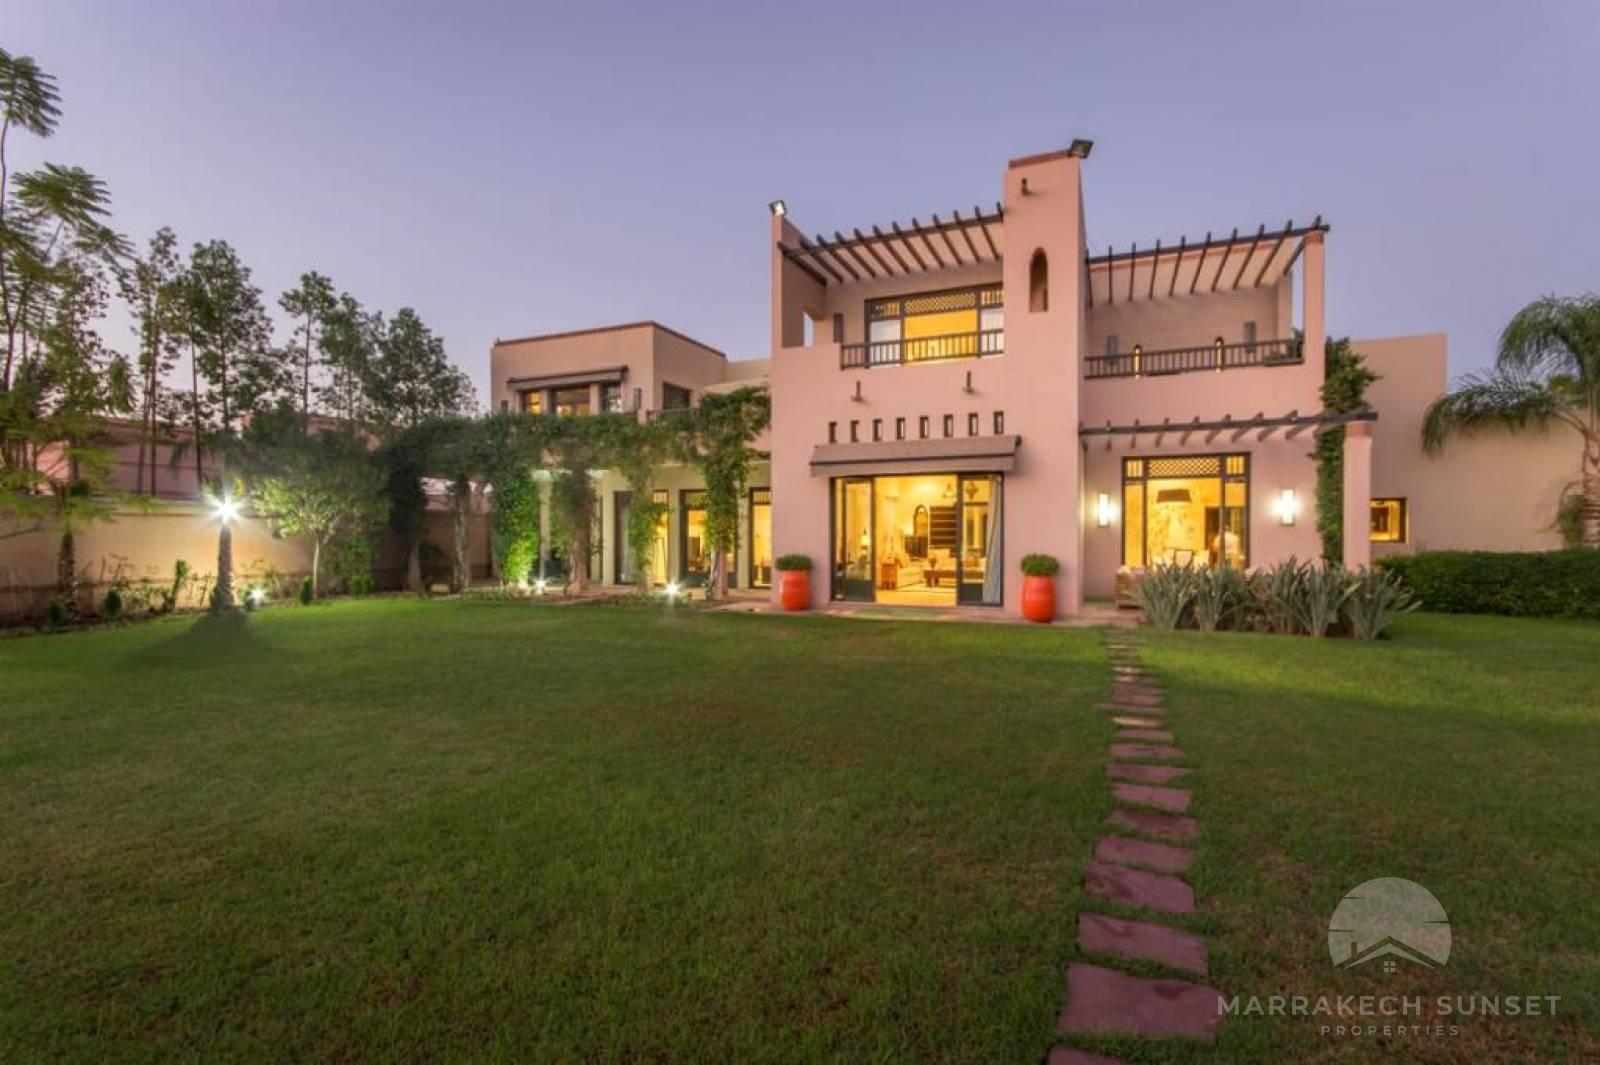 Luxury Villa for Sale in the exclusive residential complex of the Four Seasons Marrakech.